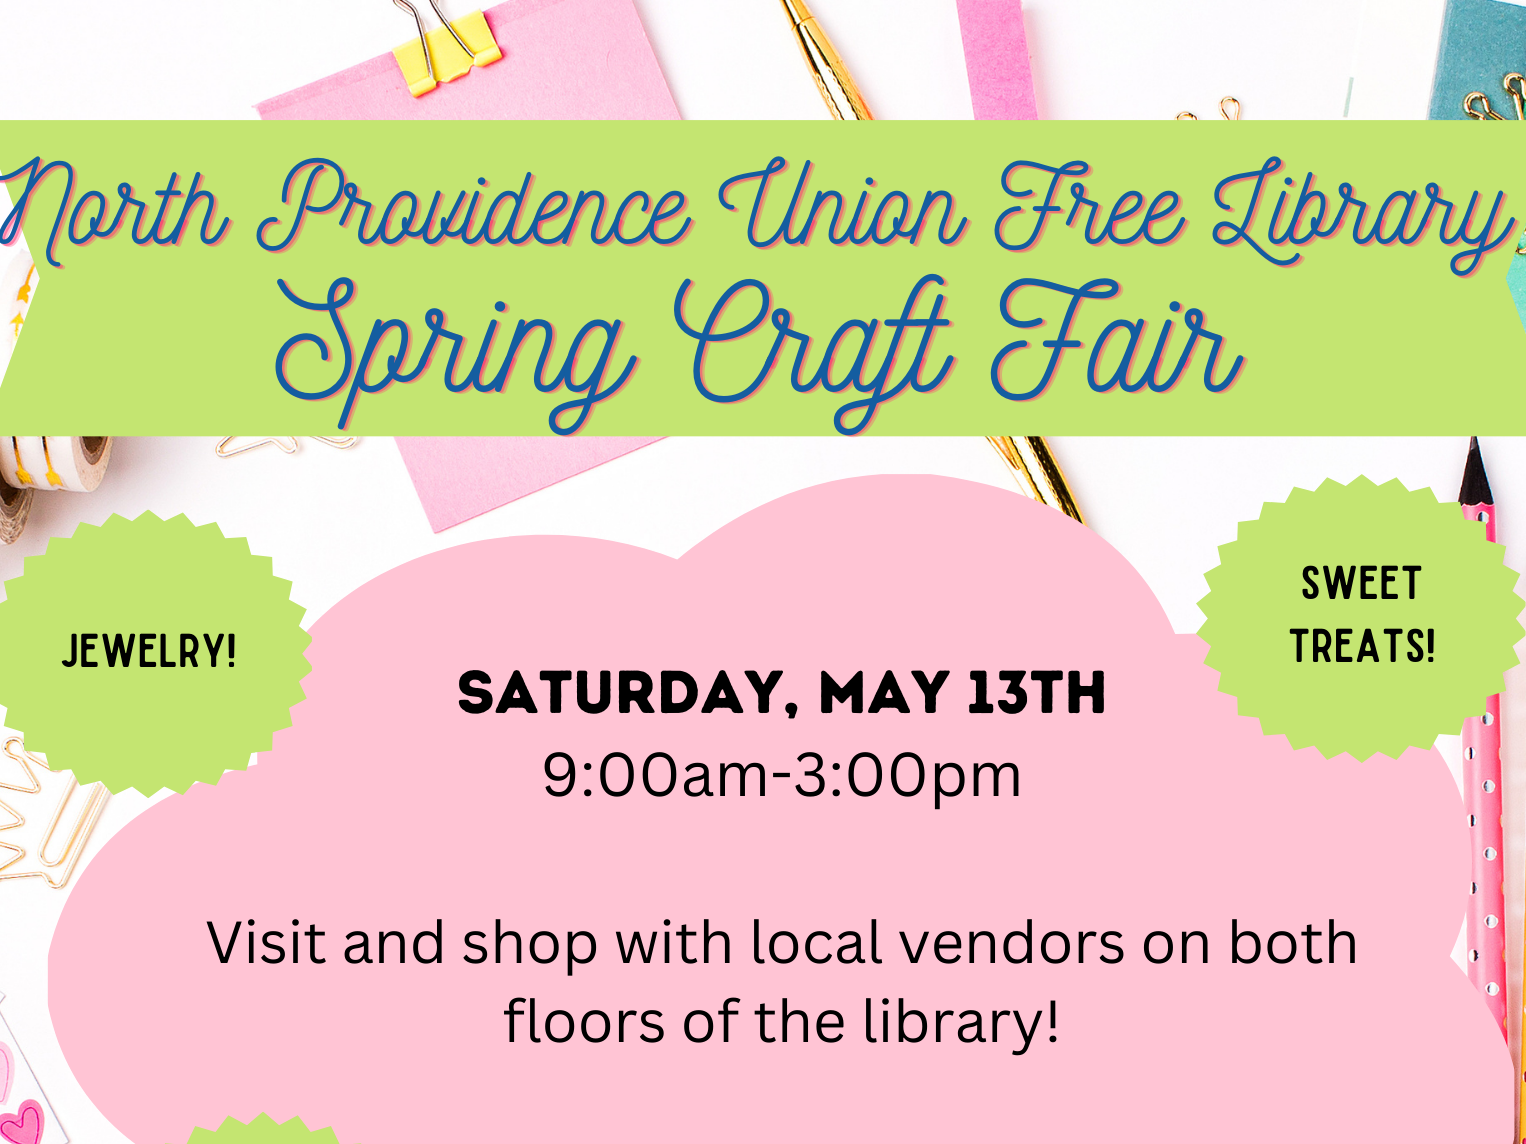 North Providence Union Free Library Spring Craft Fair Saturday, May 13th